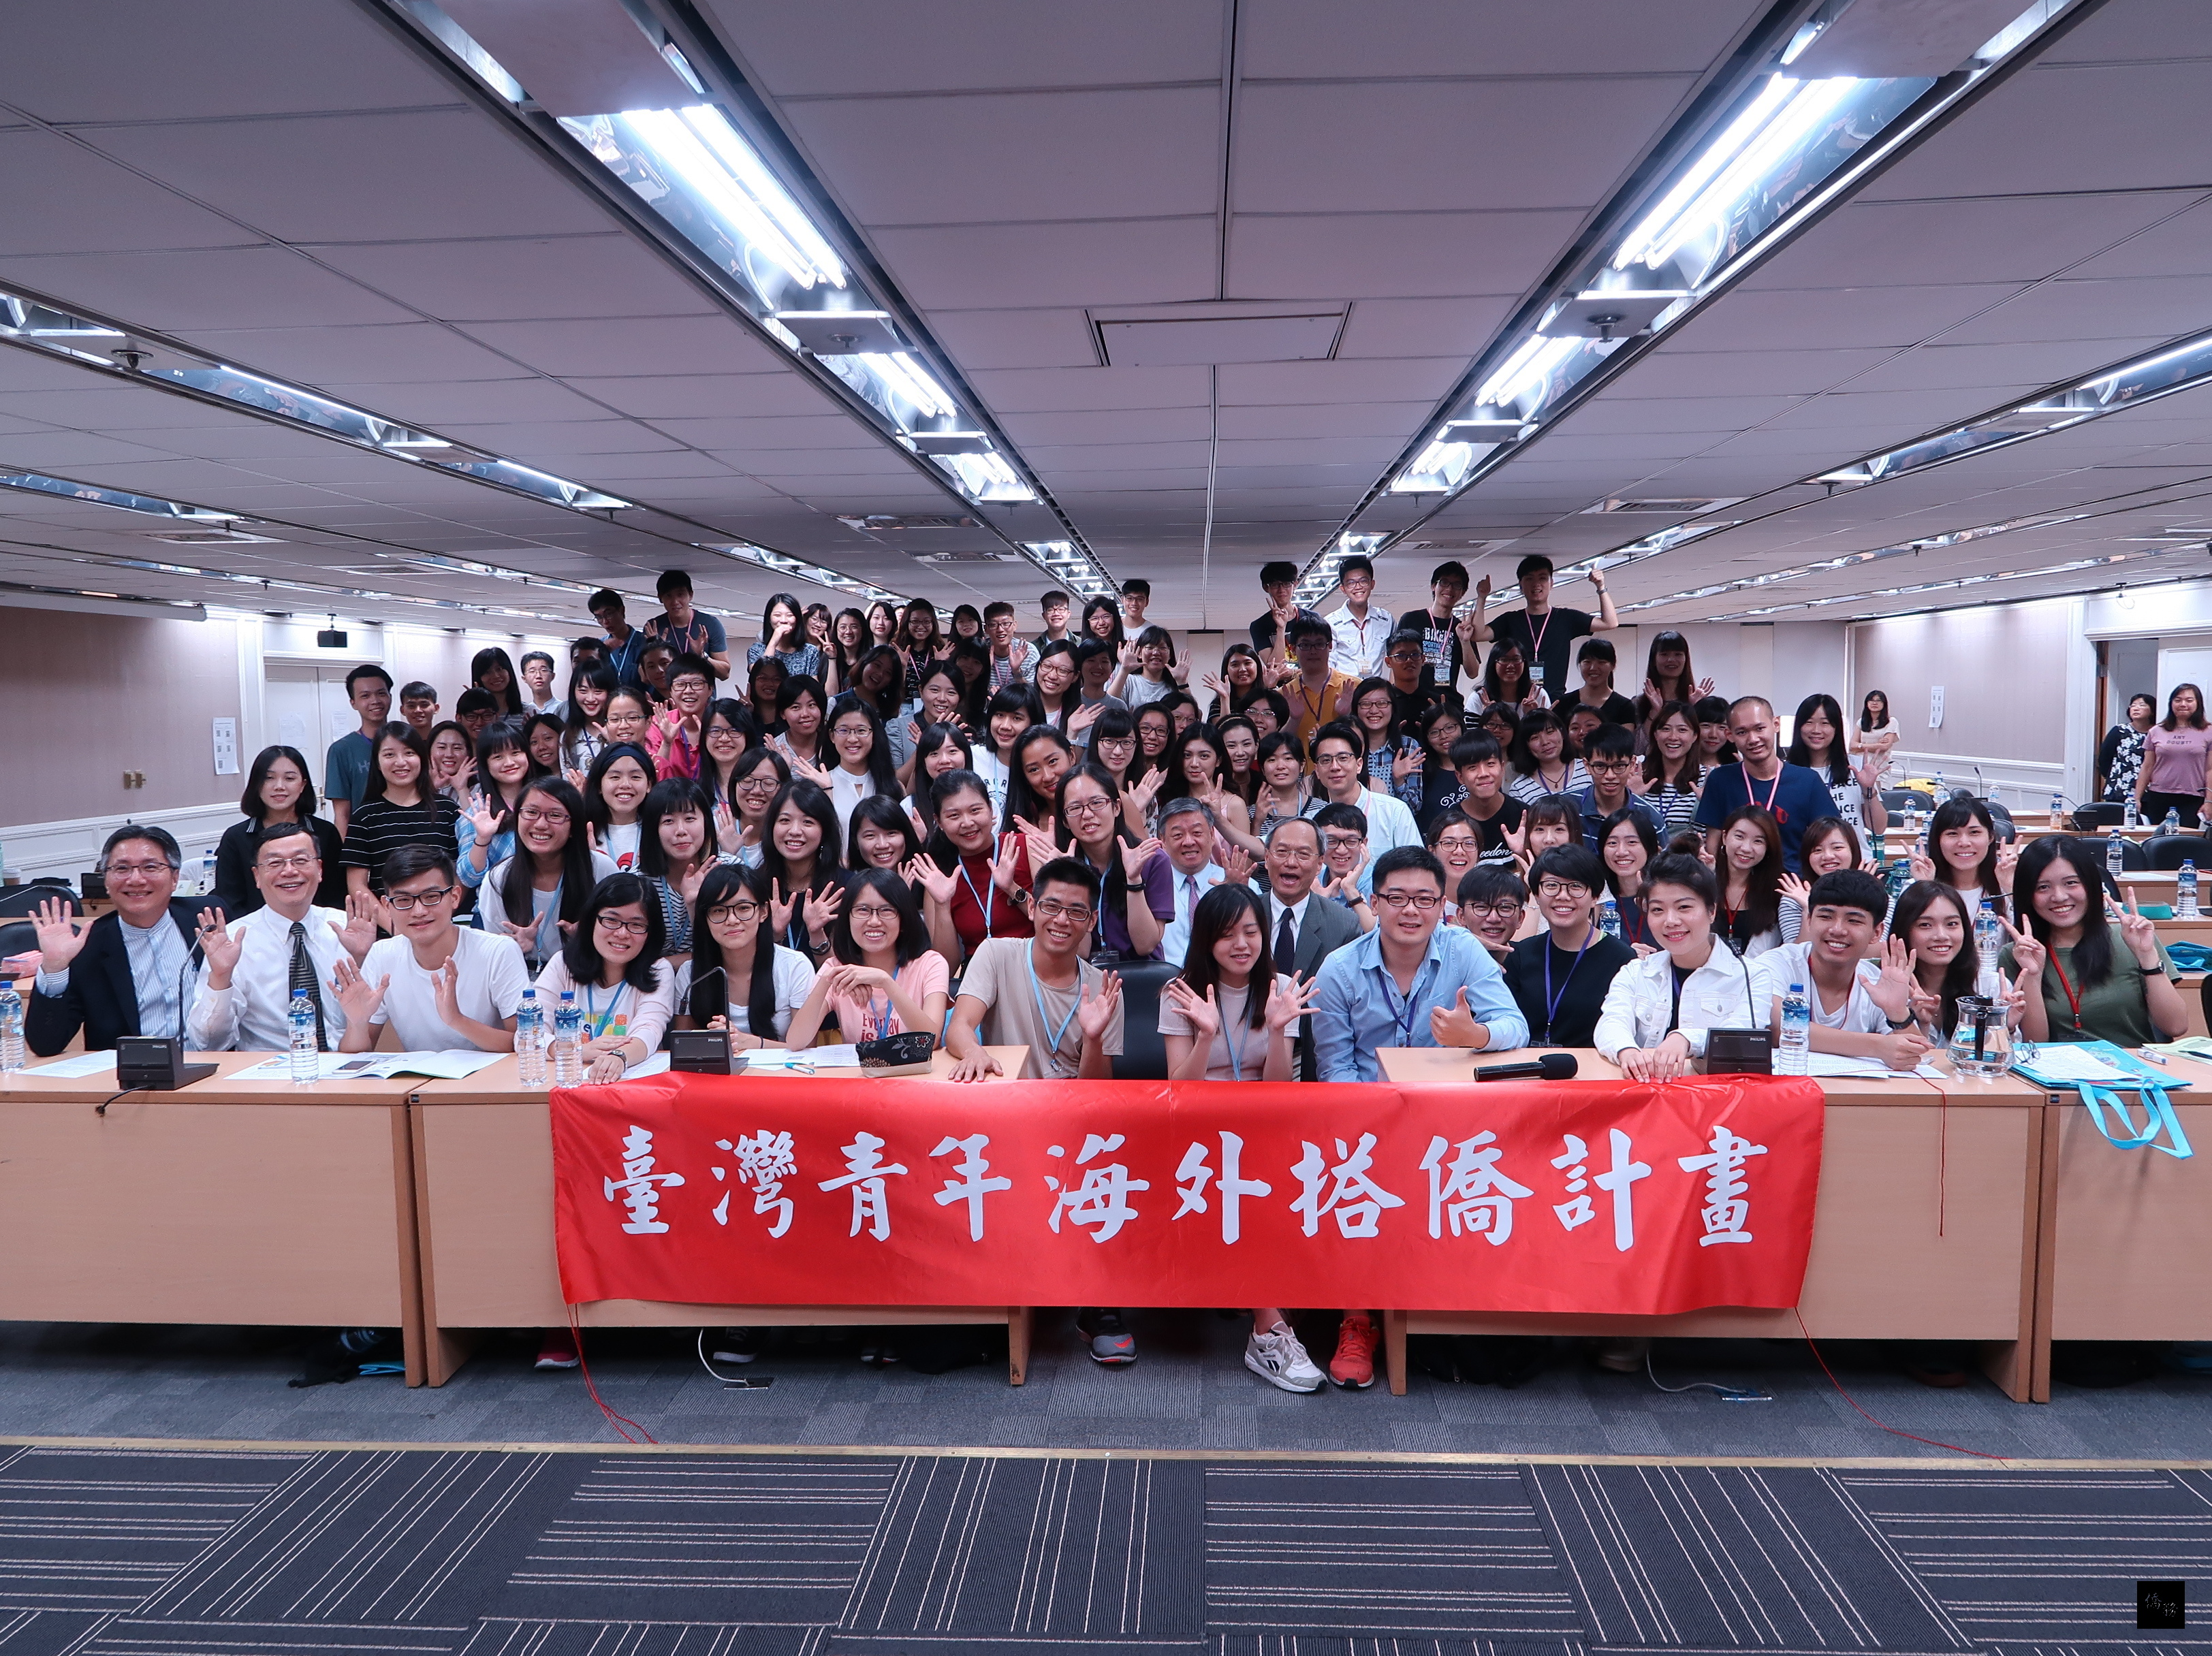 On June 5, the OCAC held the orientation meeting for the Program.